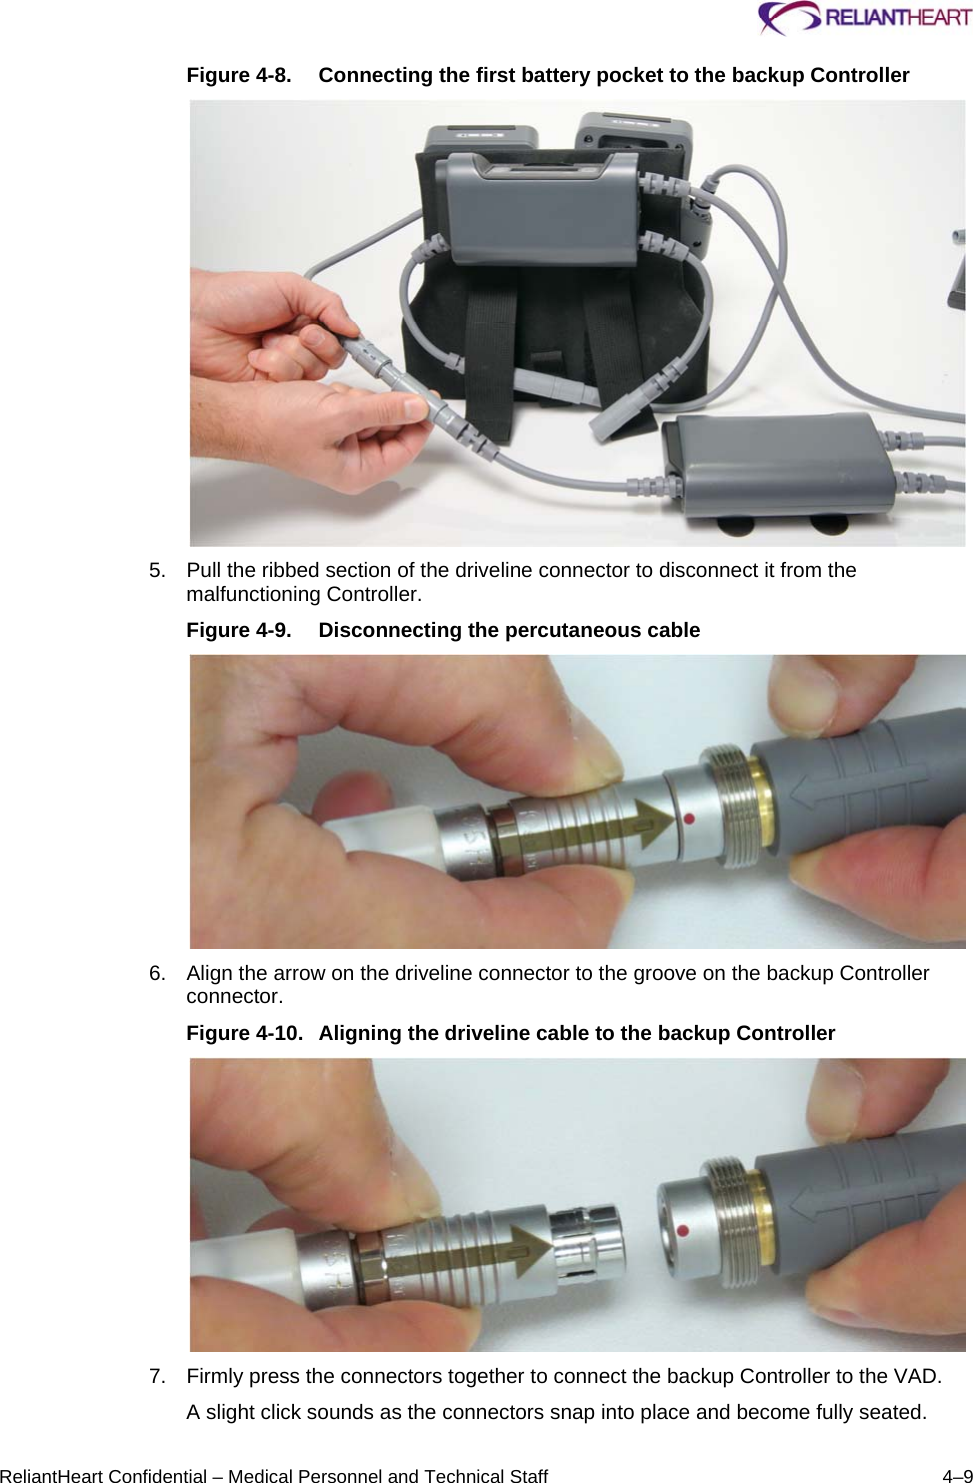     ReliantHeart Confidential – Medical Personnel and Technical Staff  4–9 Figure 4-8.  Connecting the first battery pocket to the backup Controller  5.  Pull the ribbed section of the driveline connector to disconnect it from the malfunctioning Controller. Figure 4-9.  Disconnecting the percutaneous cable  6.  Align the arrow on the driveline connector to the groove on the backup Controller connector. Figure 4-10.  Aligning the driveline cable to the backup Controller  7.  Firmly press the connectors together to connect the backup Controller to the VAD. A slight click sounds as the connectors snap into place and become fully seated. 